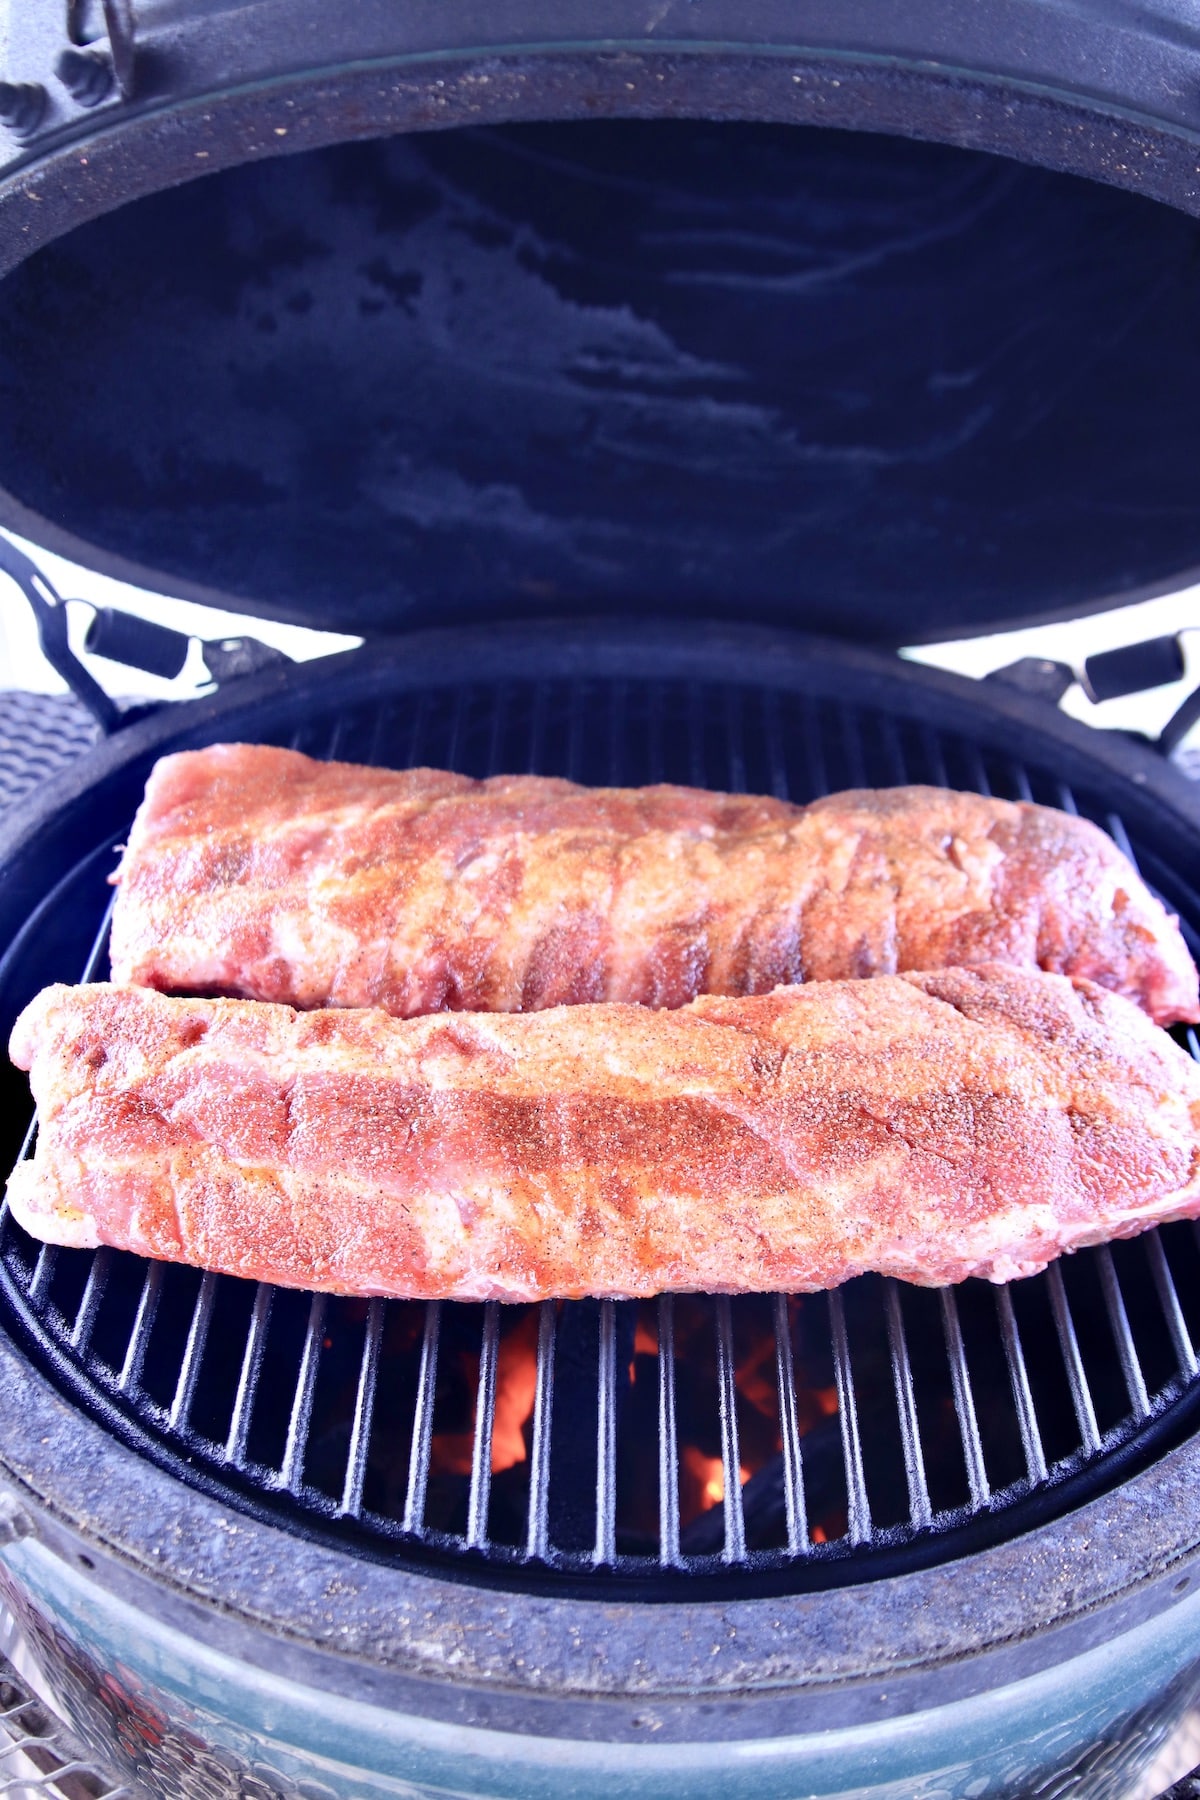 2 racks baby back ribs on a grill.